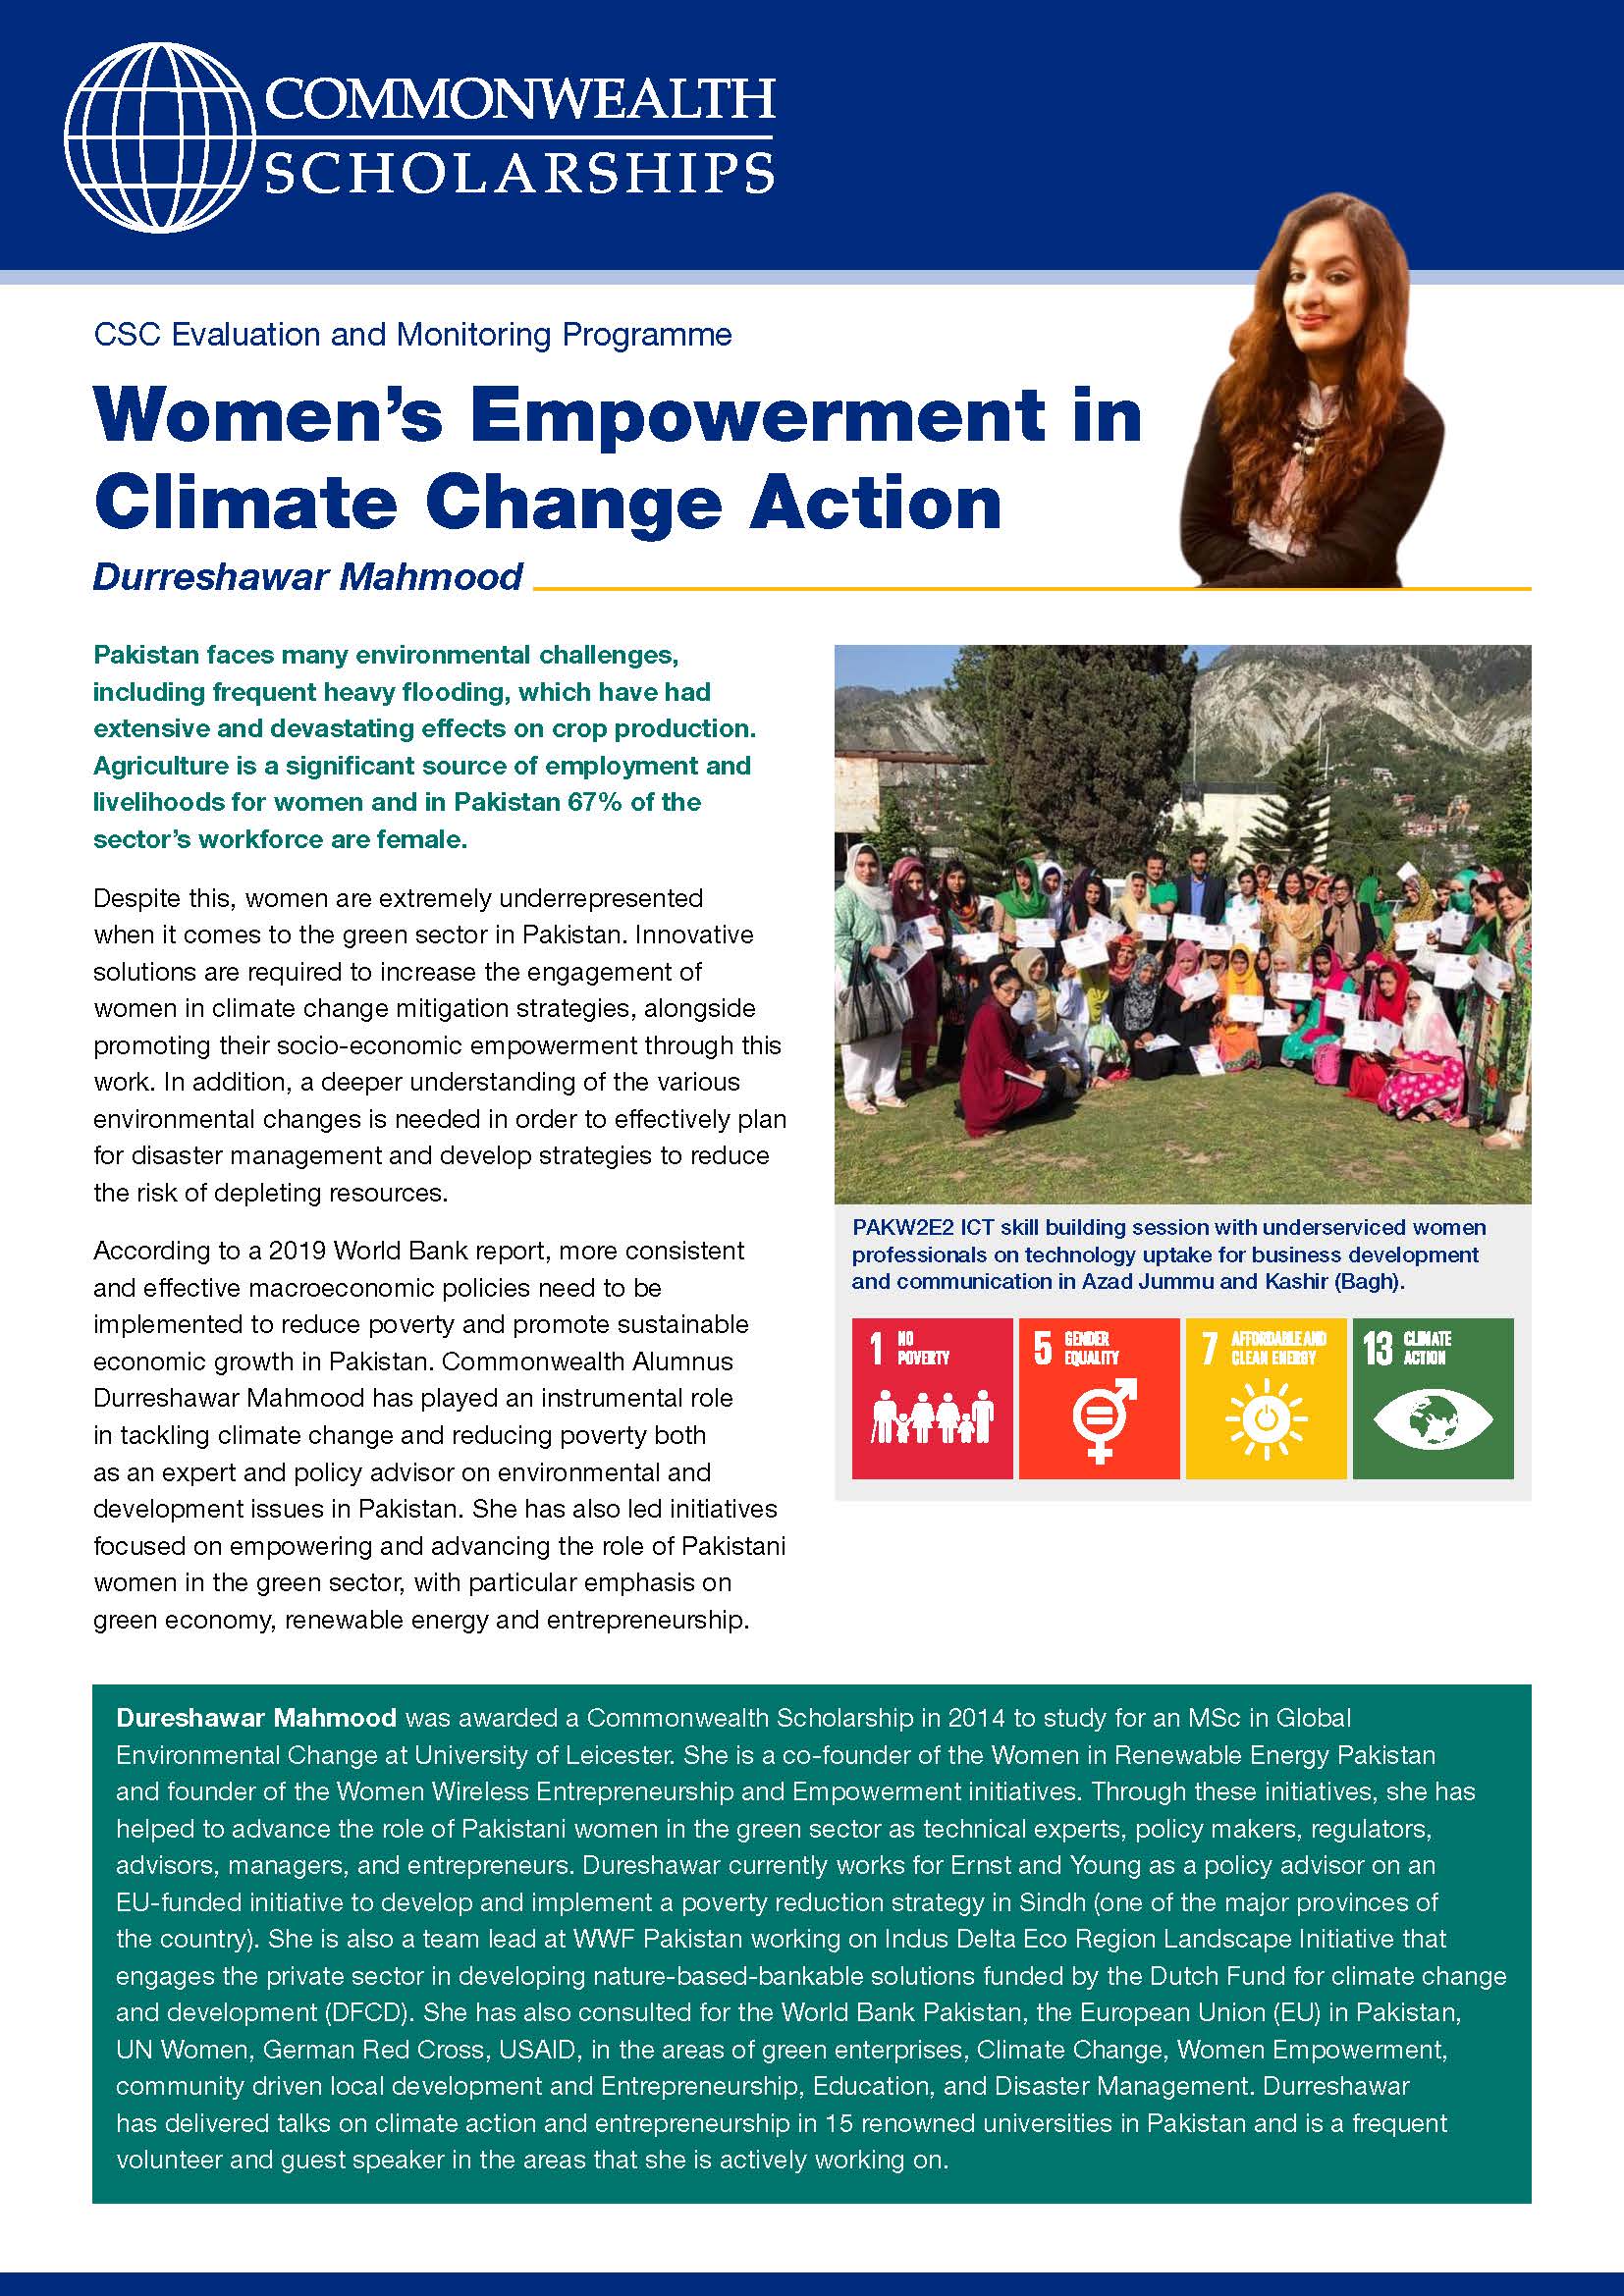 Read the Women’s Empowerment in Climate Change Action case study